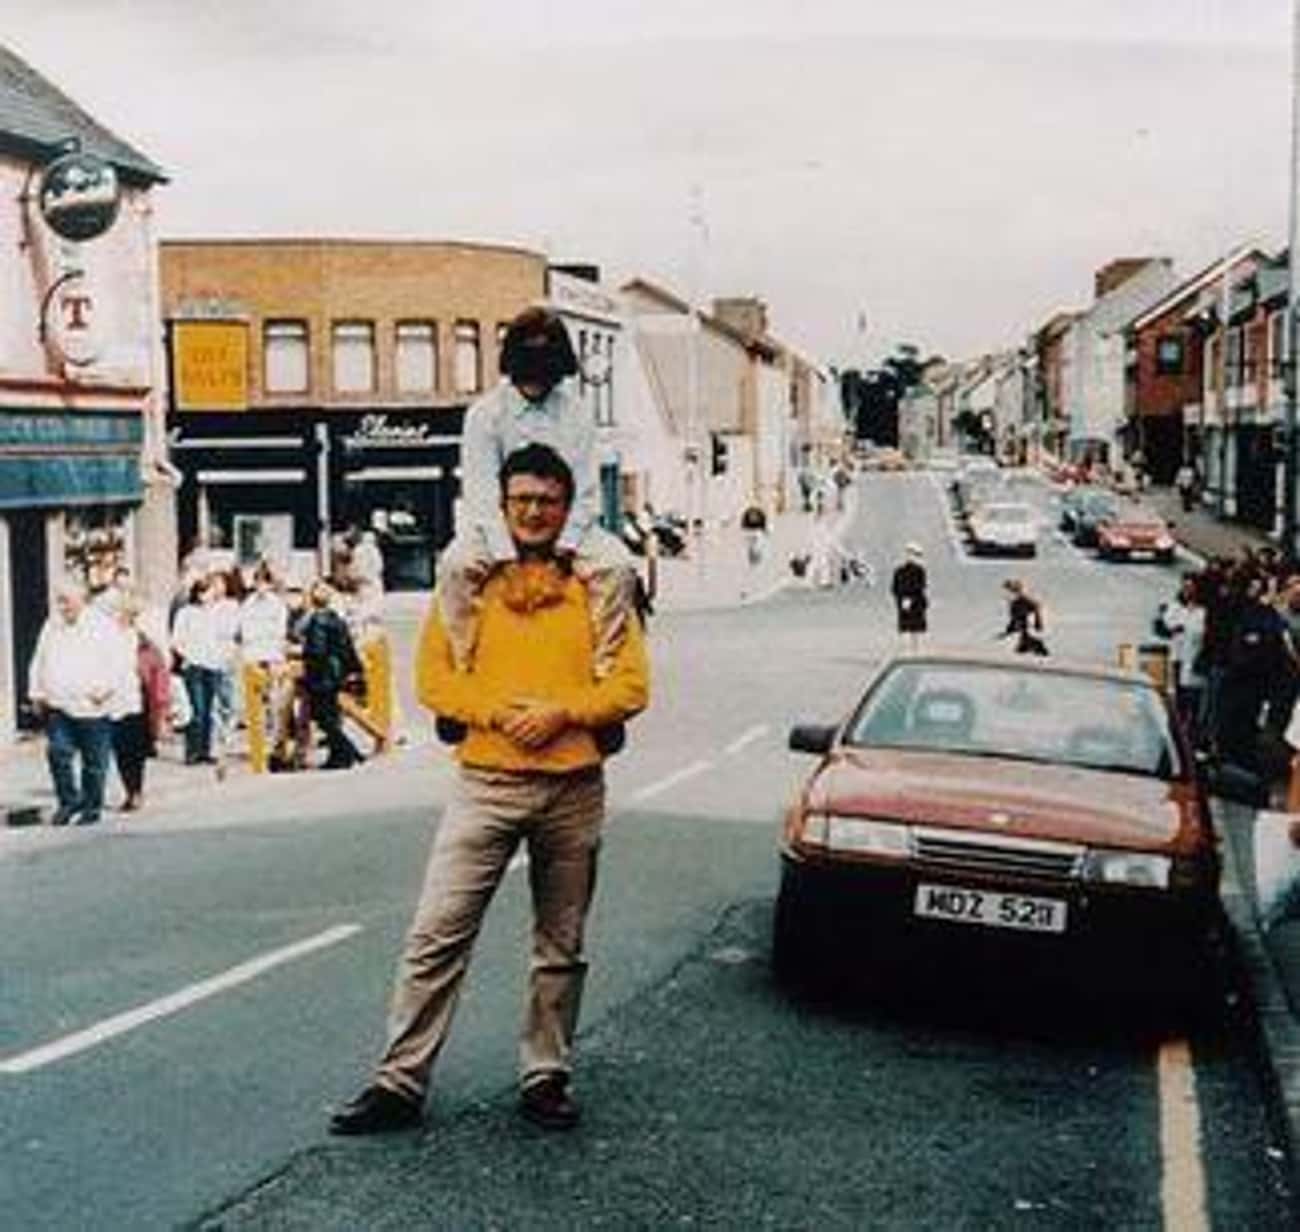 1998: Moments Before A Fatal Explosion In Omagh, Ireland